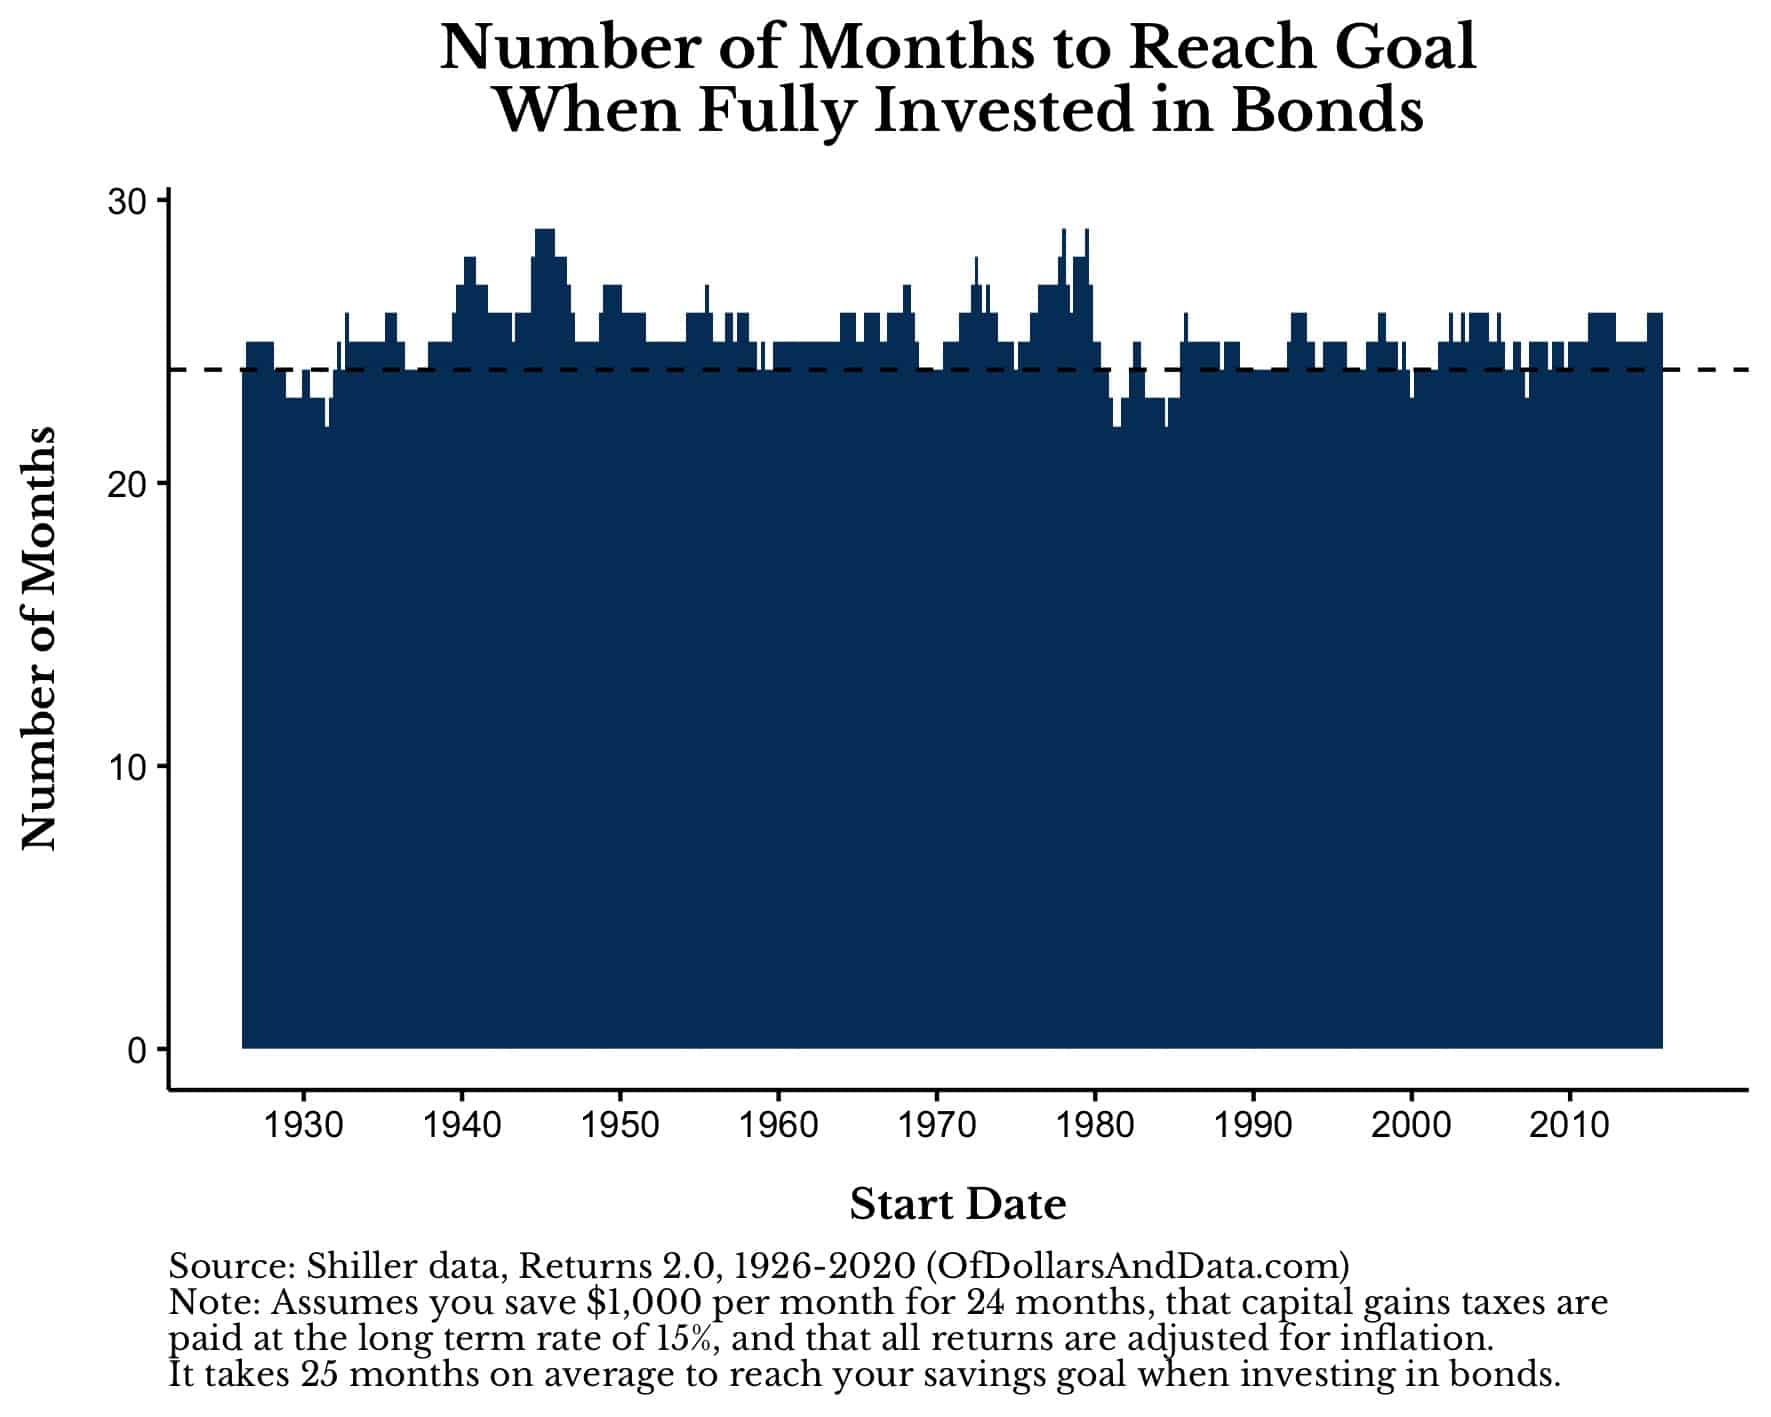 Number of months to reach savings goal when investing in bonds, 1926-2020